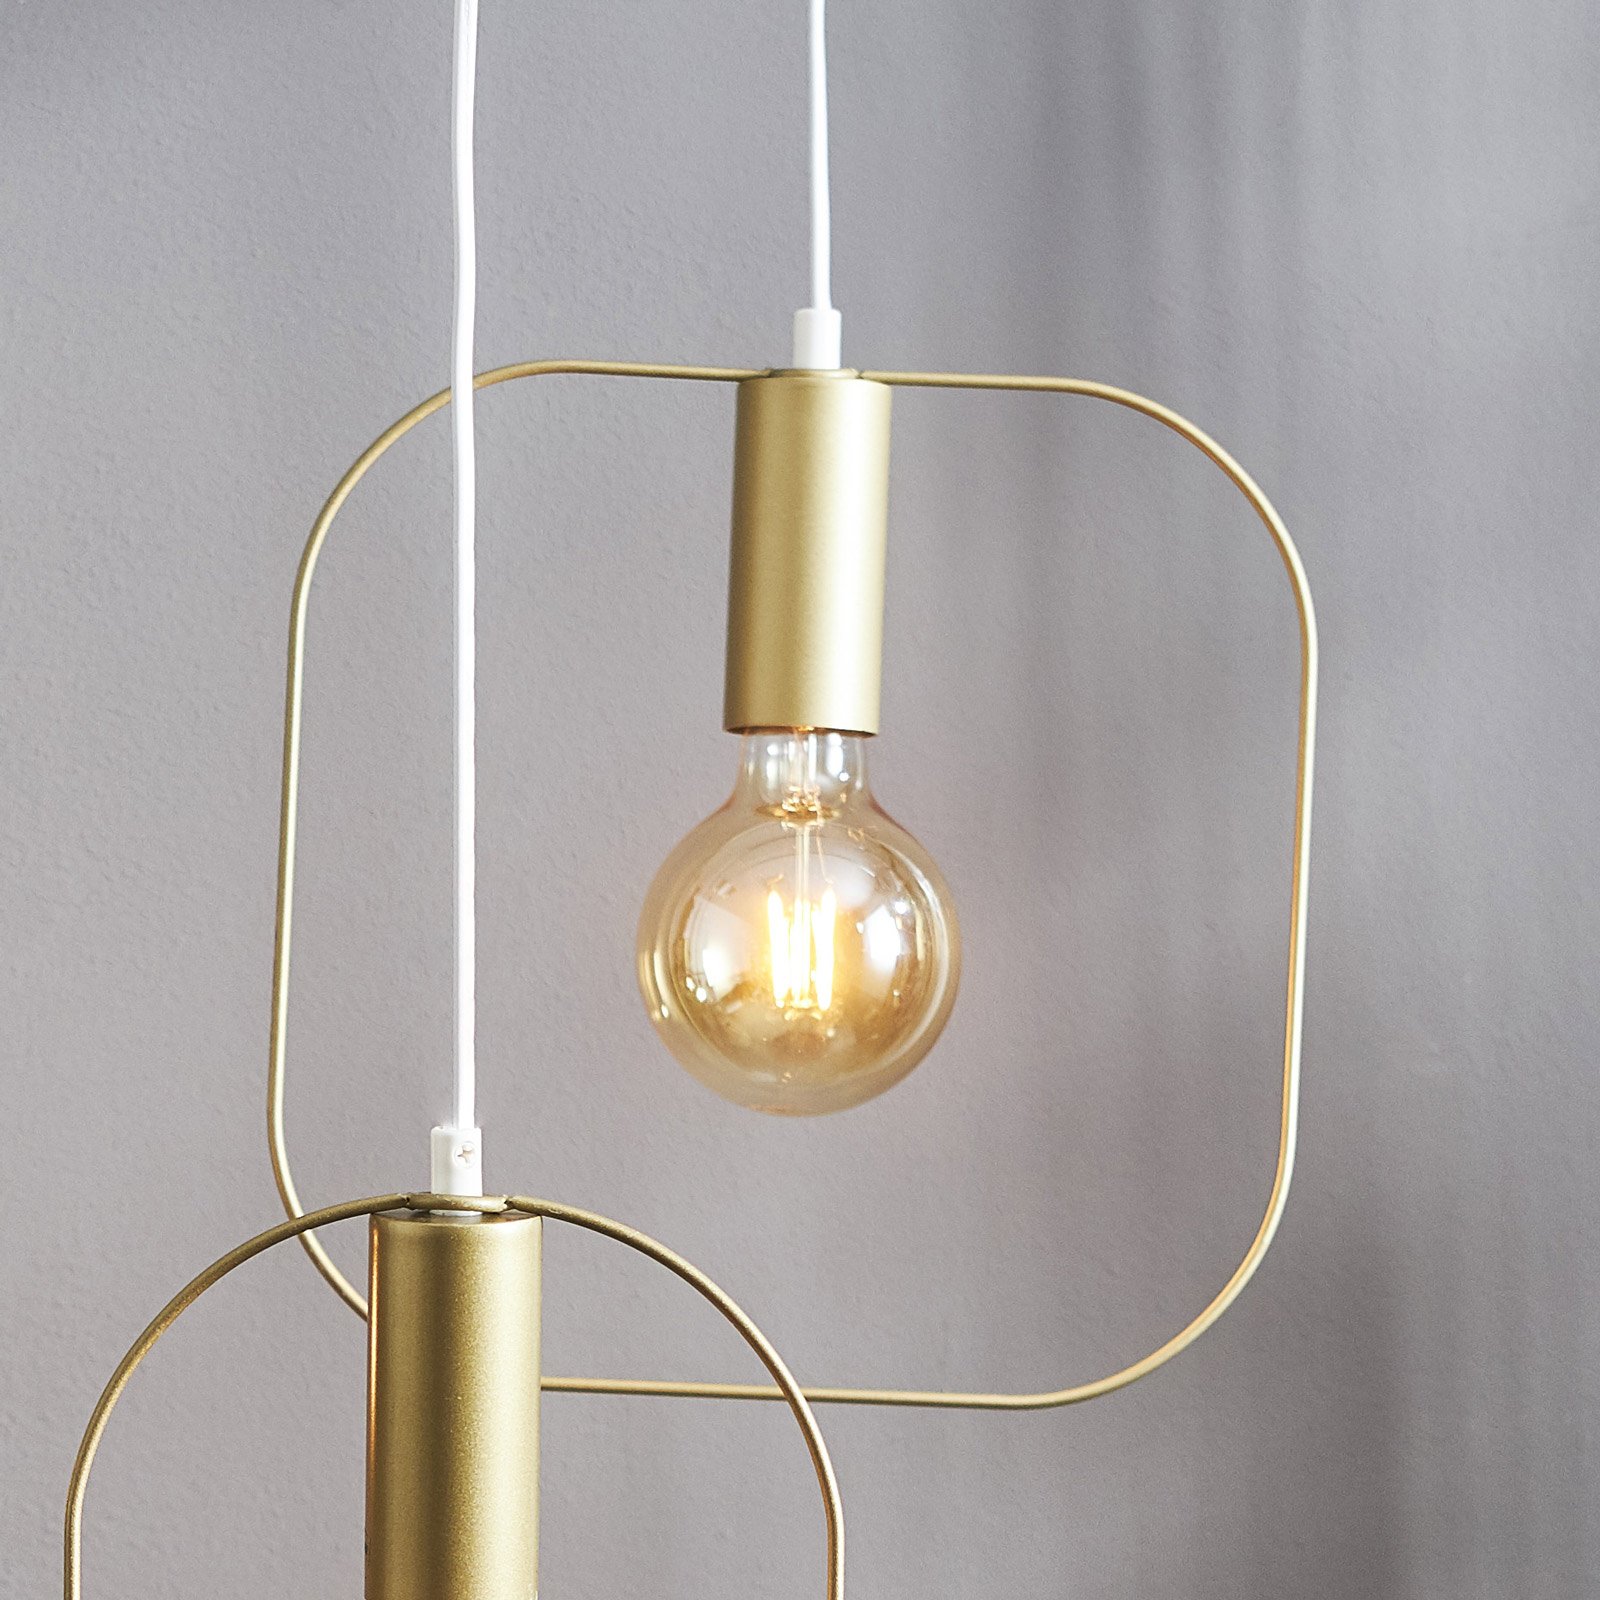 Shape decorative hanging light with square, gold